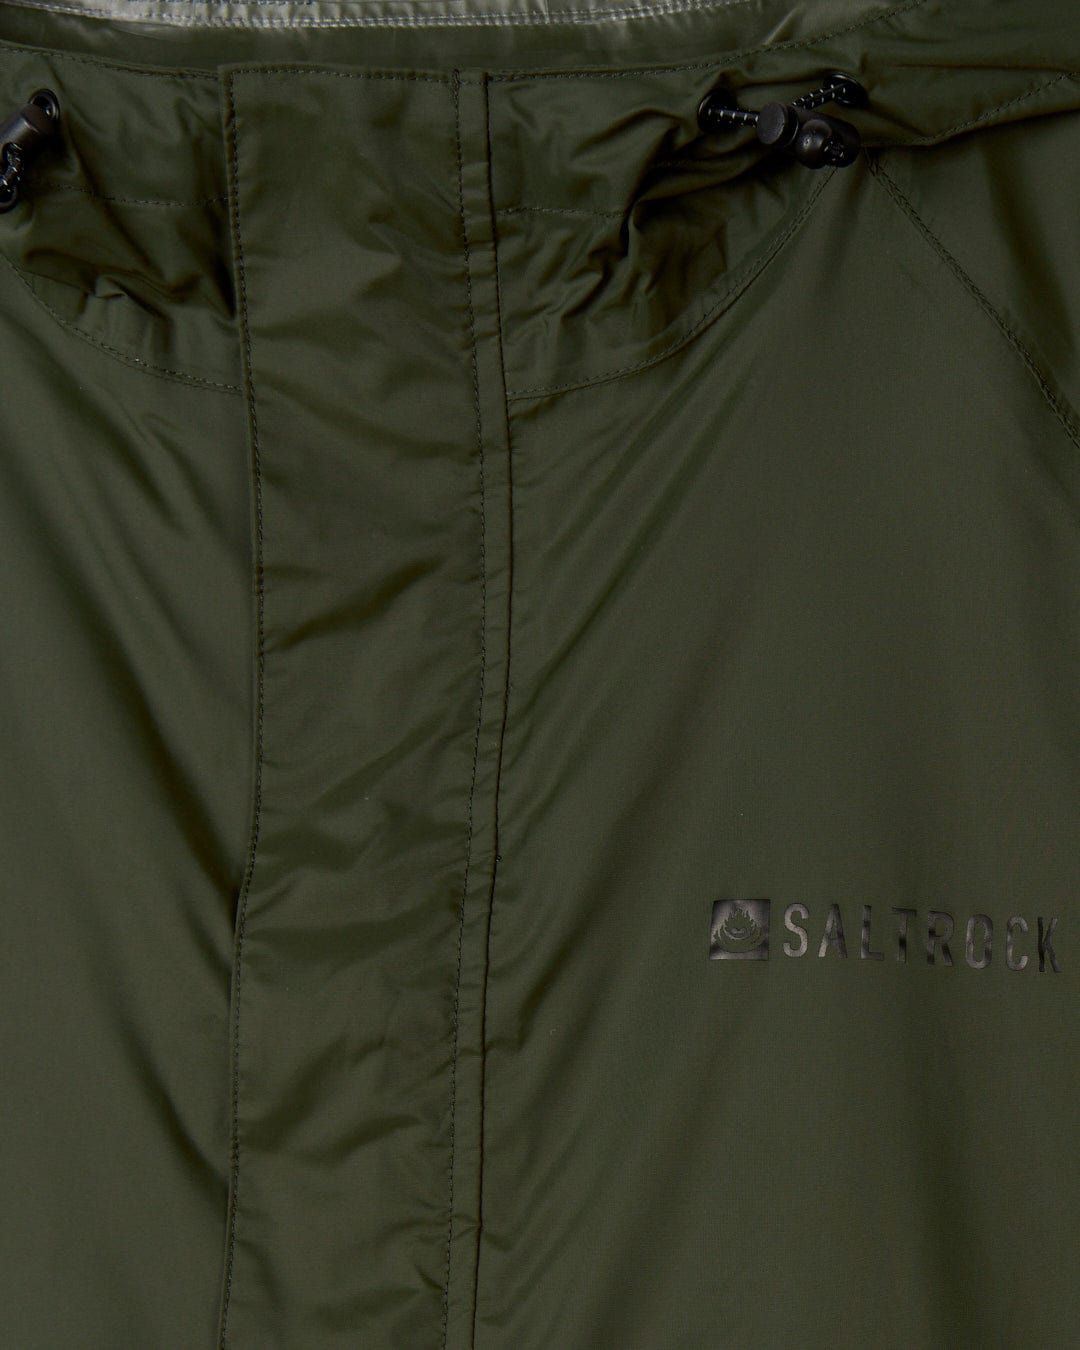 Close-up of a green Rainier - Mens Packable Waterproof Jacket showing the texture, zipper detail, and embroidered Saltrock logo.